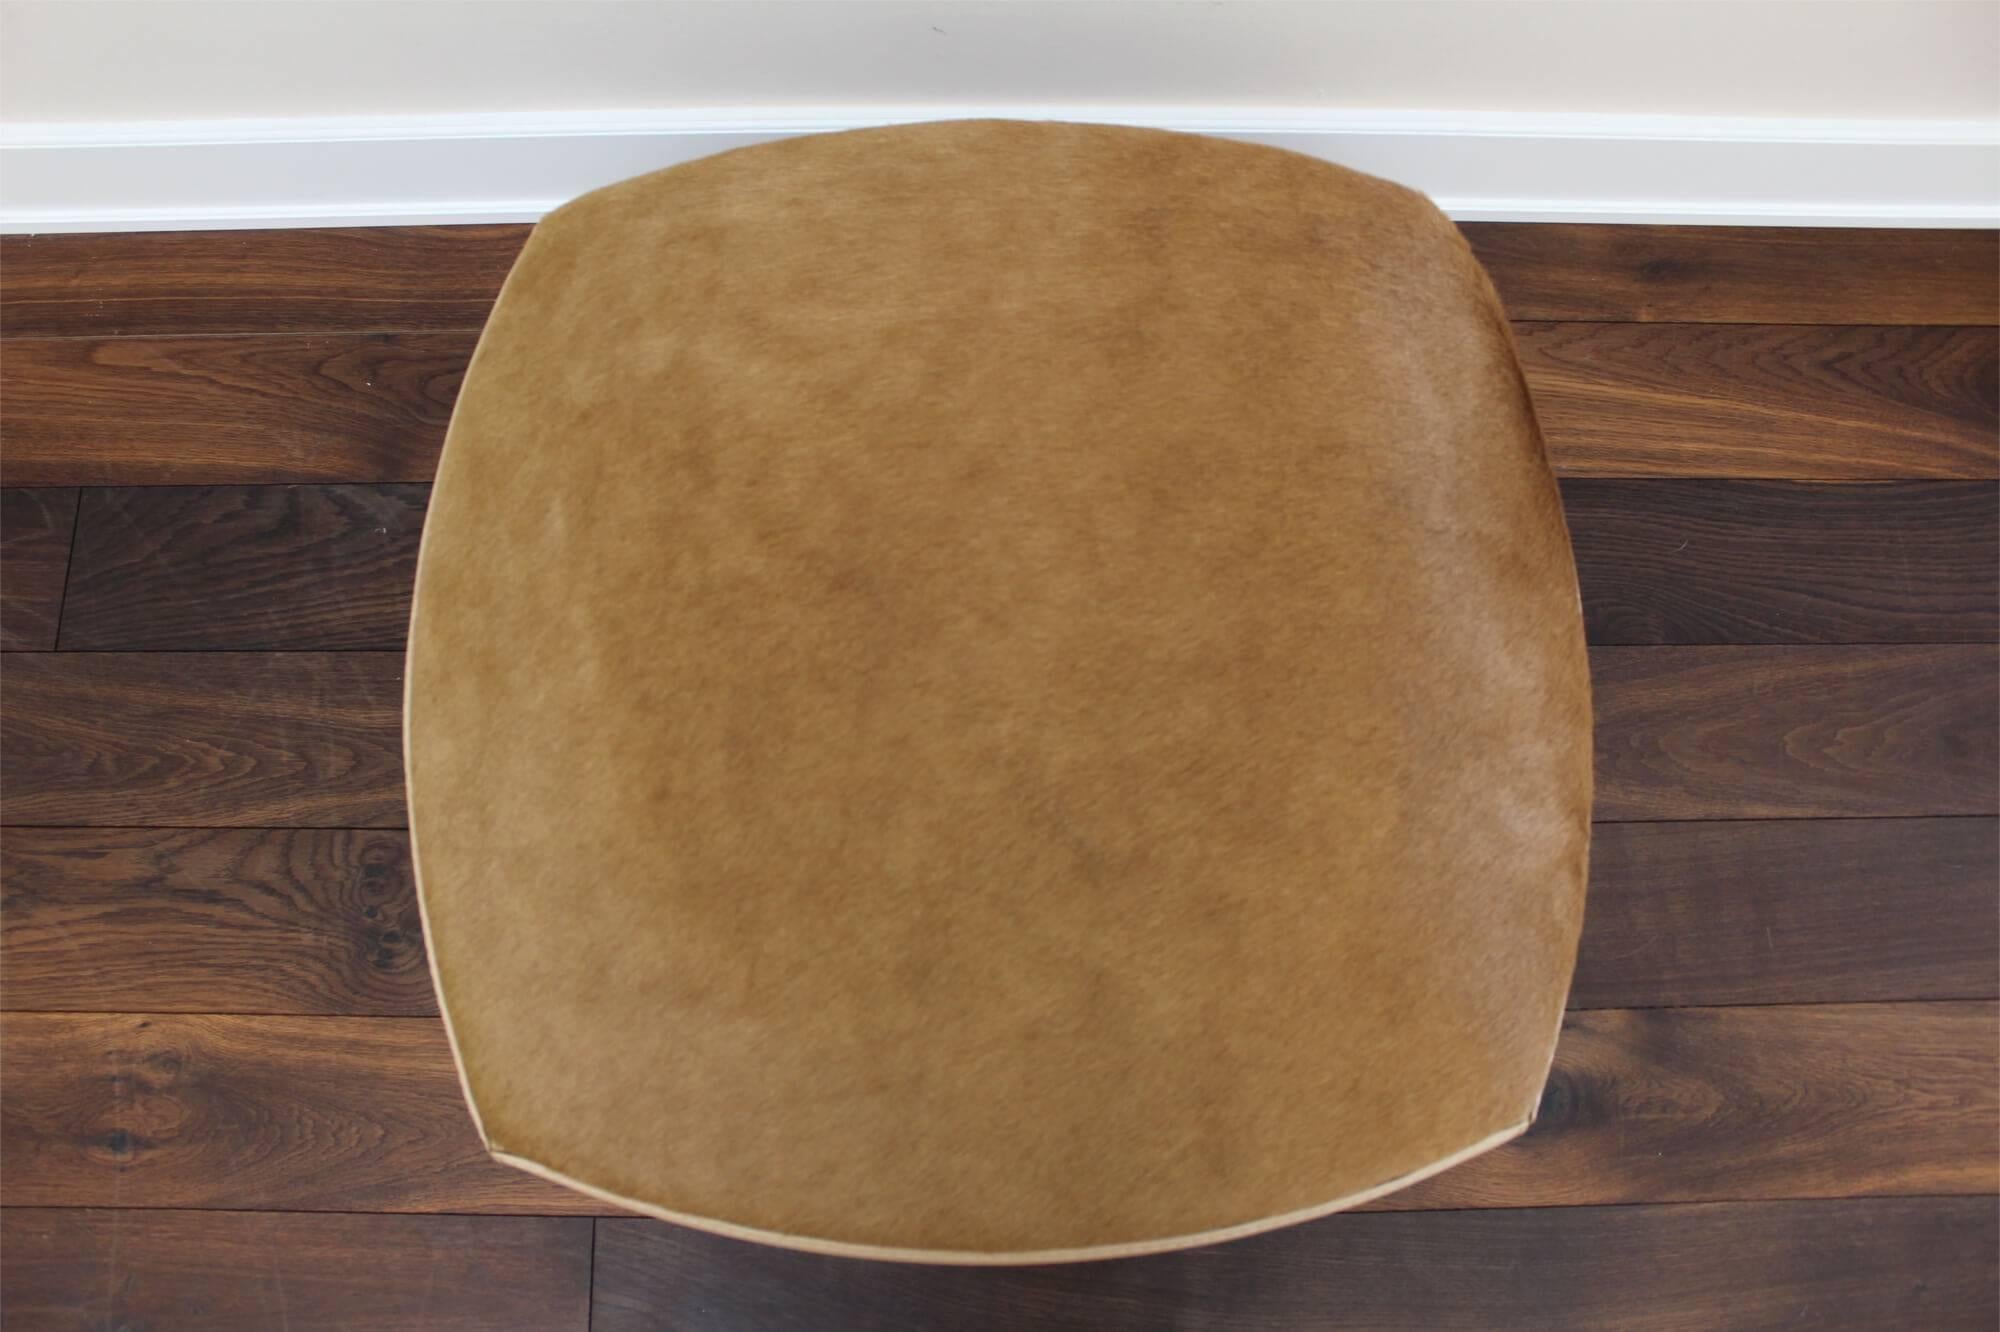 Very exceptional pouf standing on roles with the prestigious Trussardi emblem. Inspired by the style of Milanese homes with this pouf you create a cozy, classy setting. Seating made of cow skin and hair, corpus applied with leather.